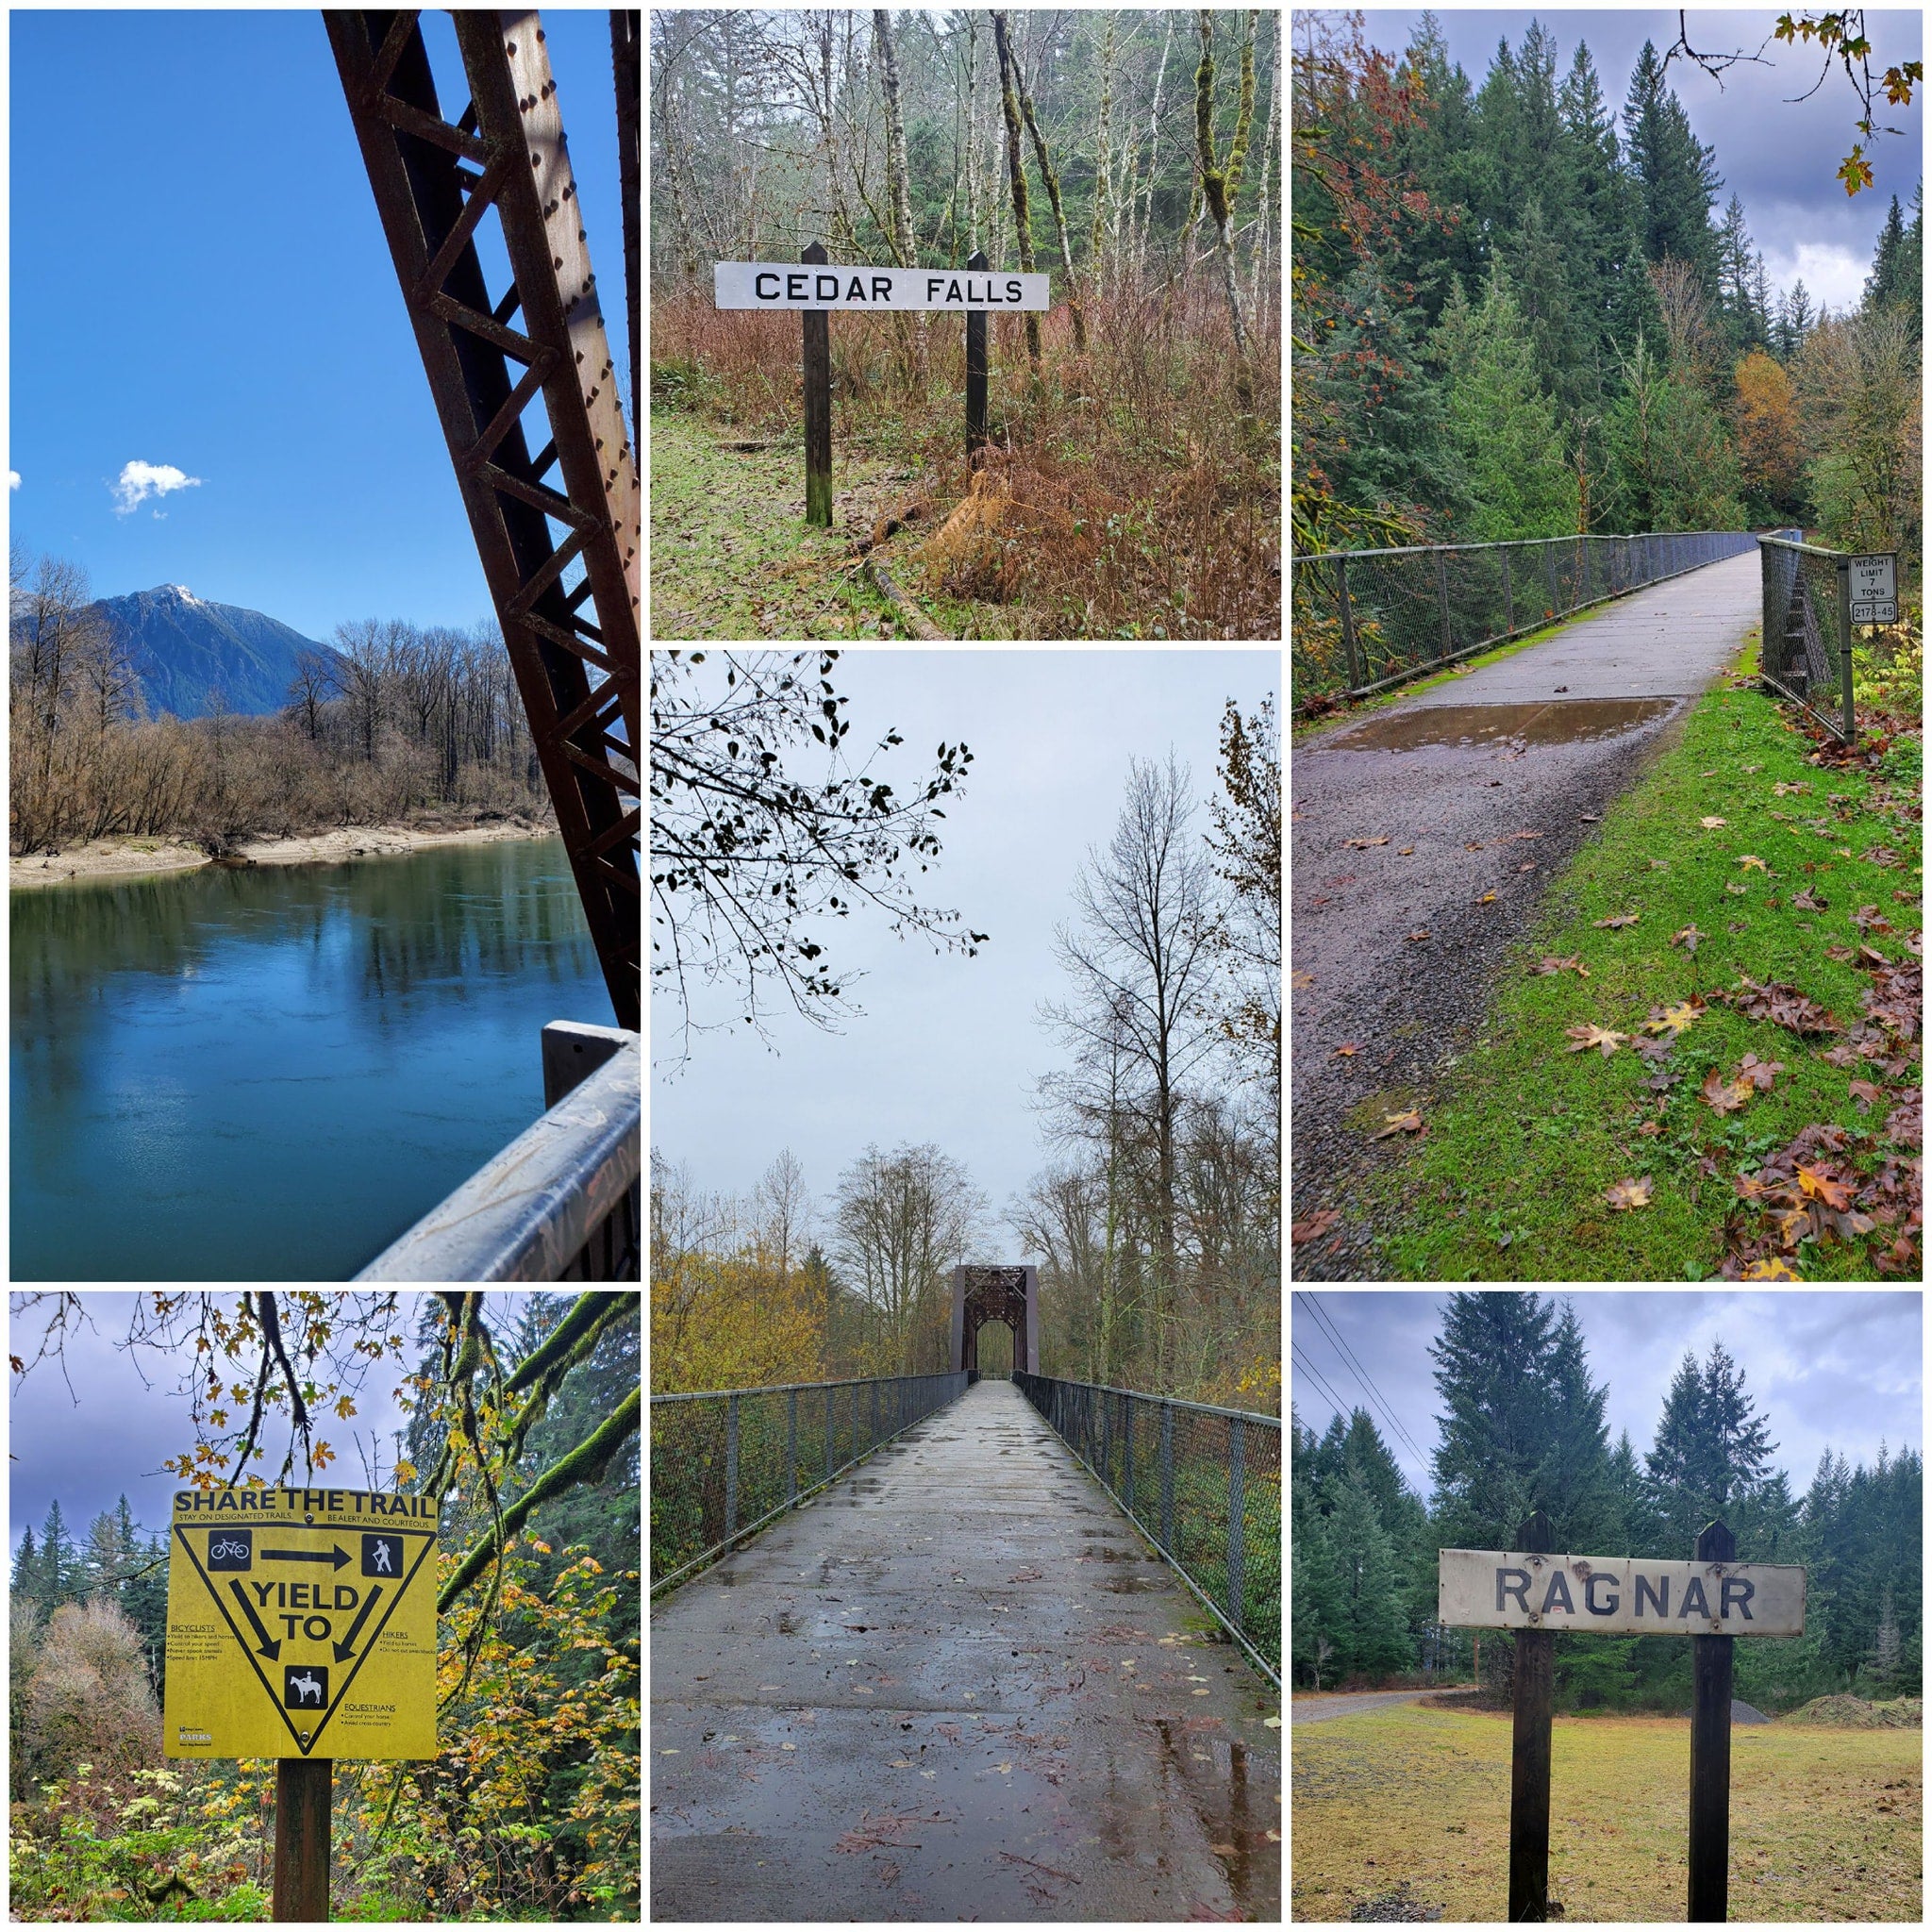 Snoqualmie Valley Trail and John Wayne (Palouse to Cascades) Trail.